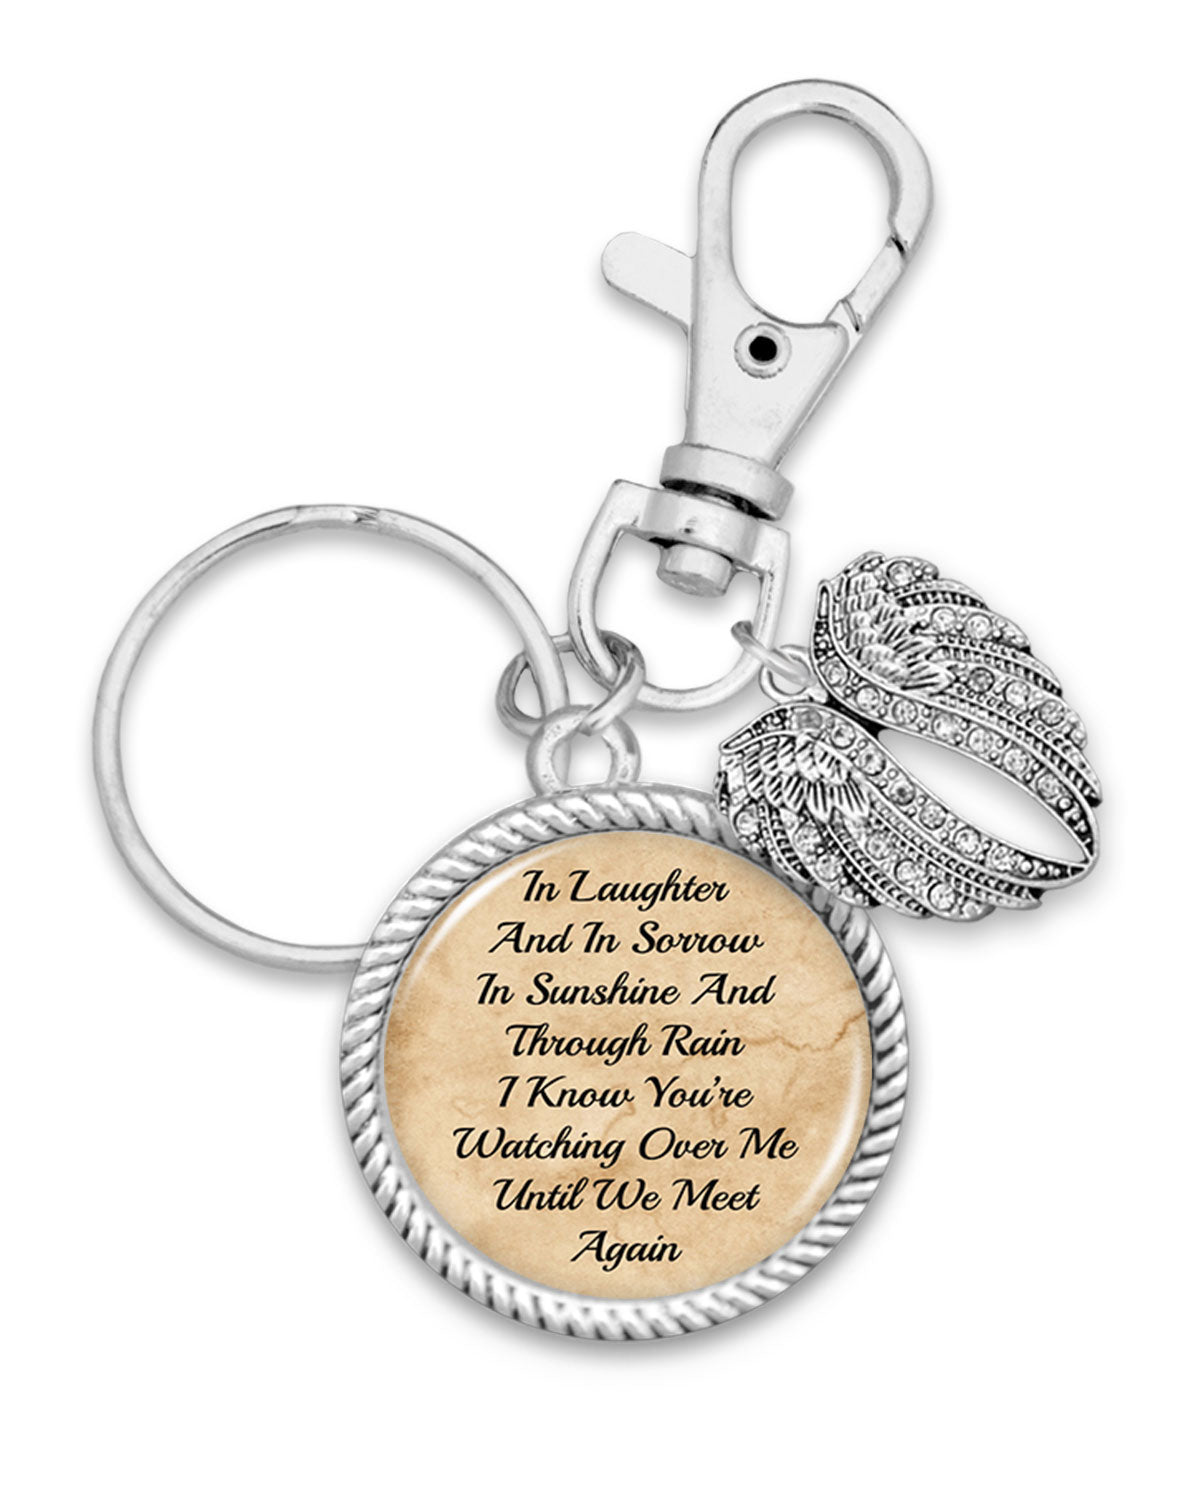 Watching Over Me Angel Wings Charm Key Chain